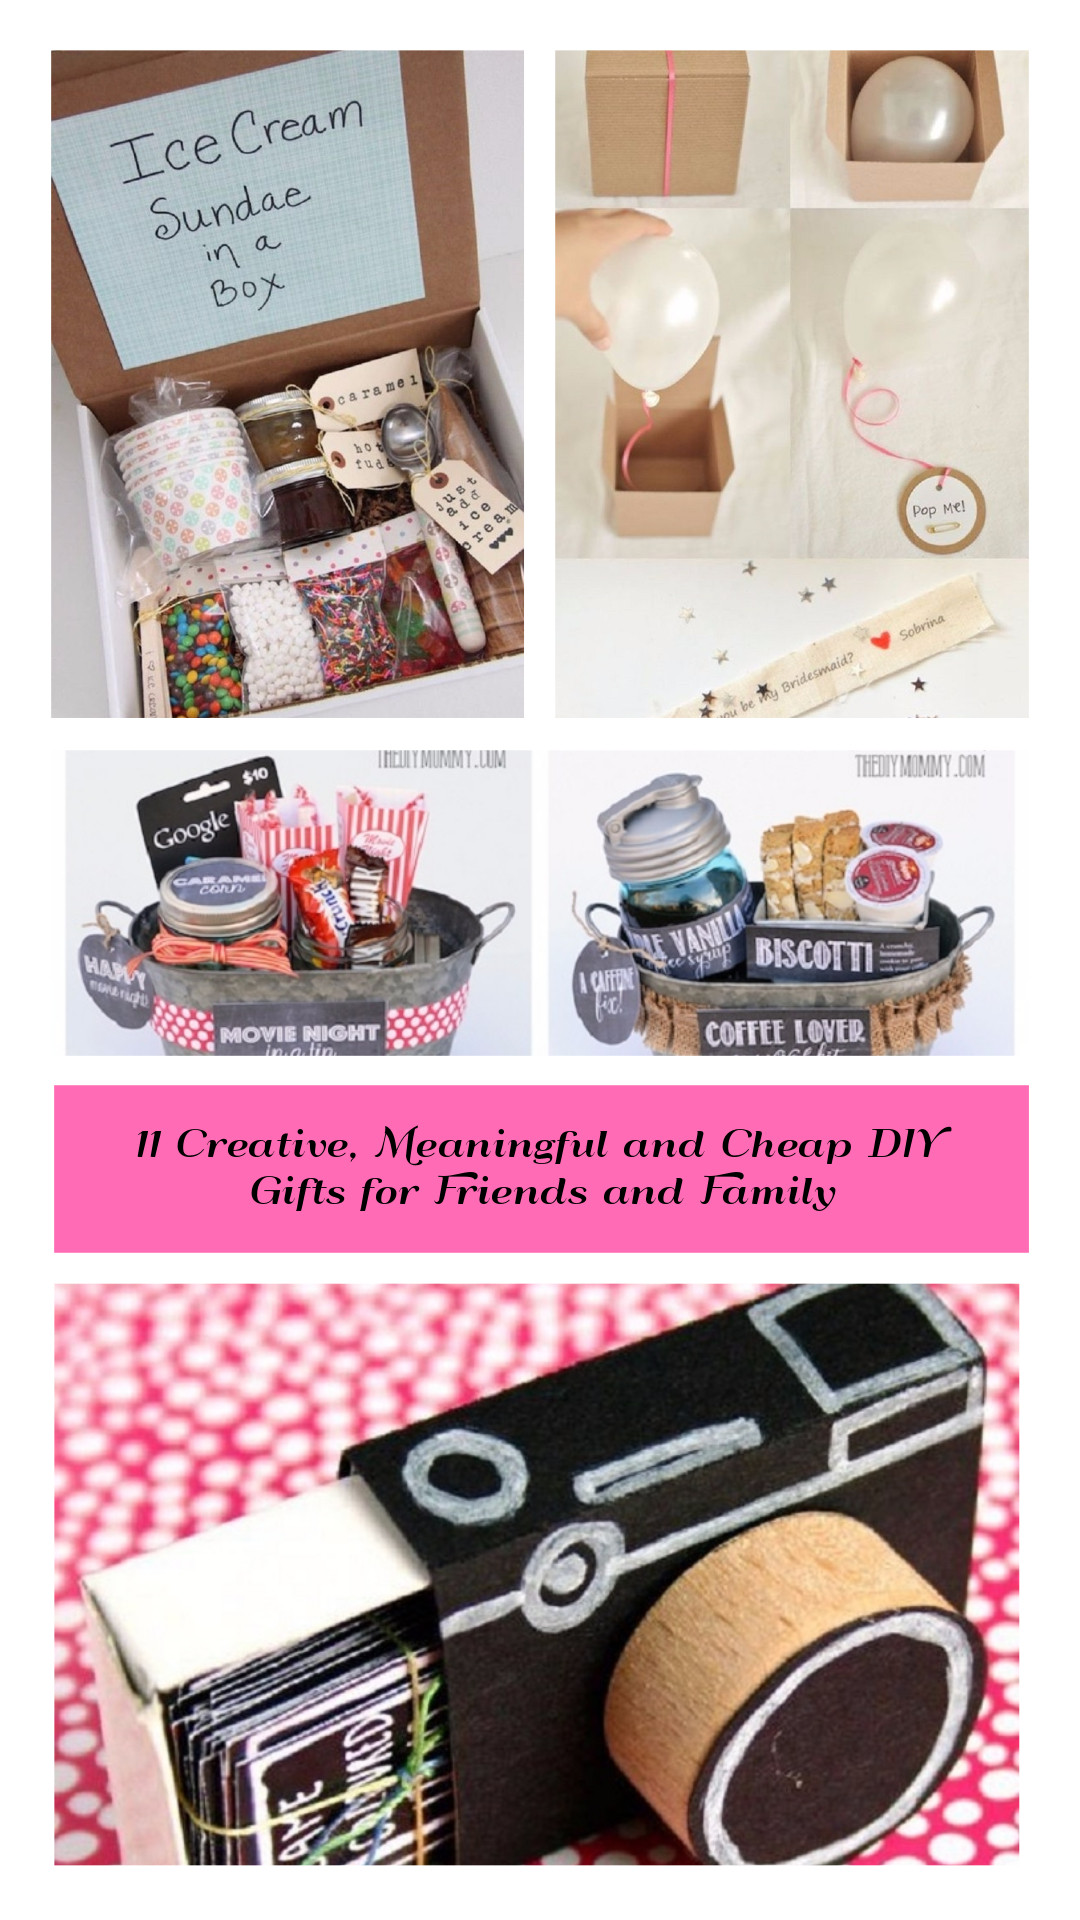 Gifts For Friends DIY
 11 Creative Meaningful and Cheap DIY Gifts for Friends